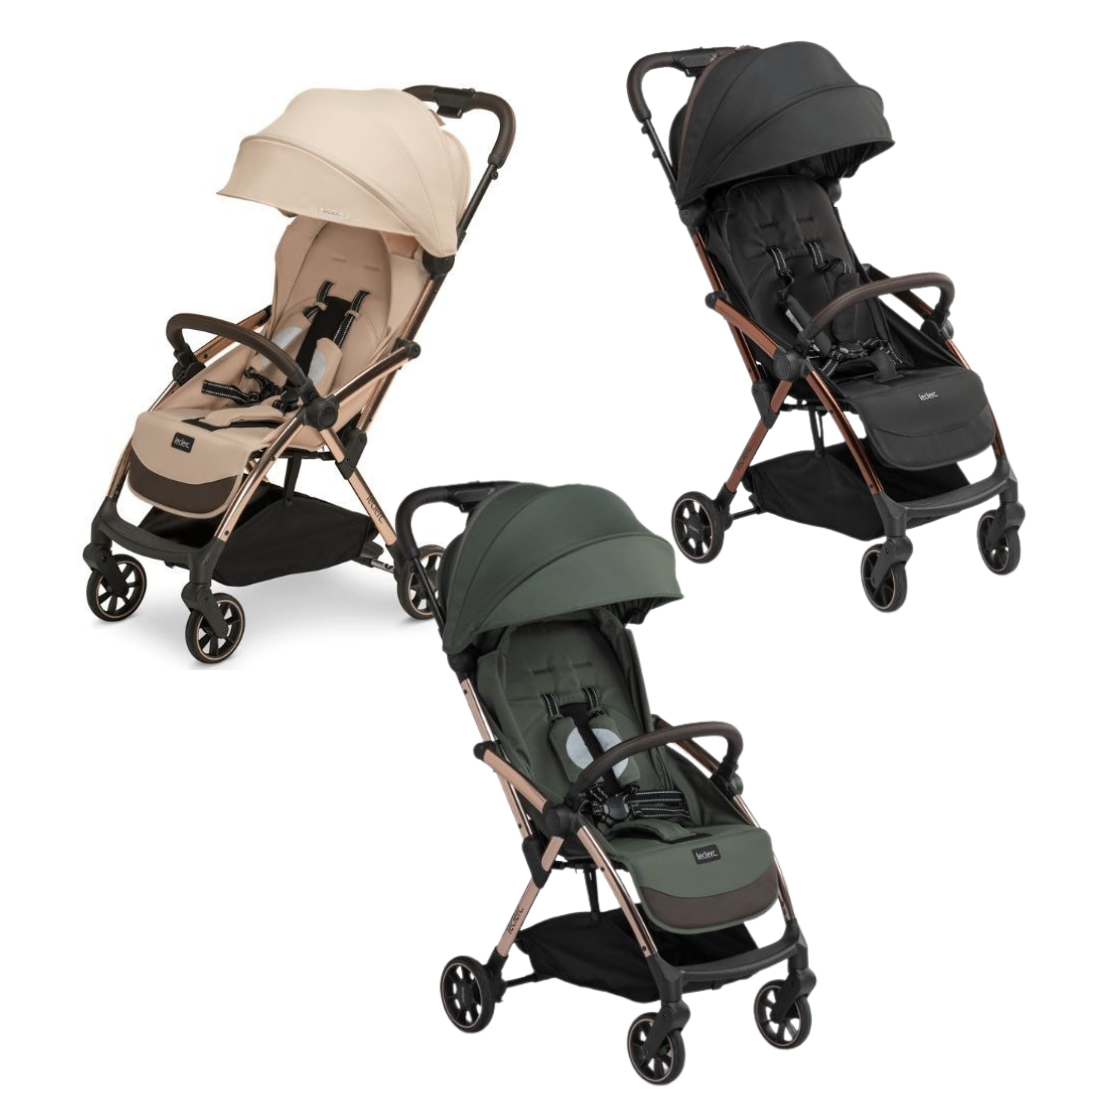 Leclerc Baby Influencer Stroller - Tiny Tots Baby Store 